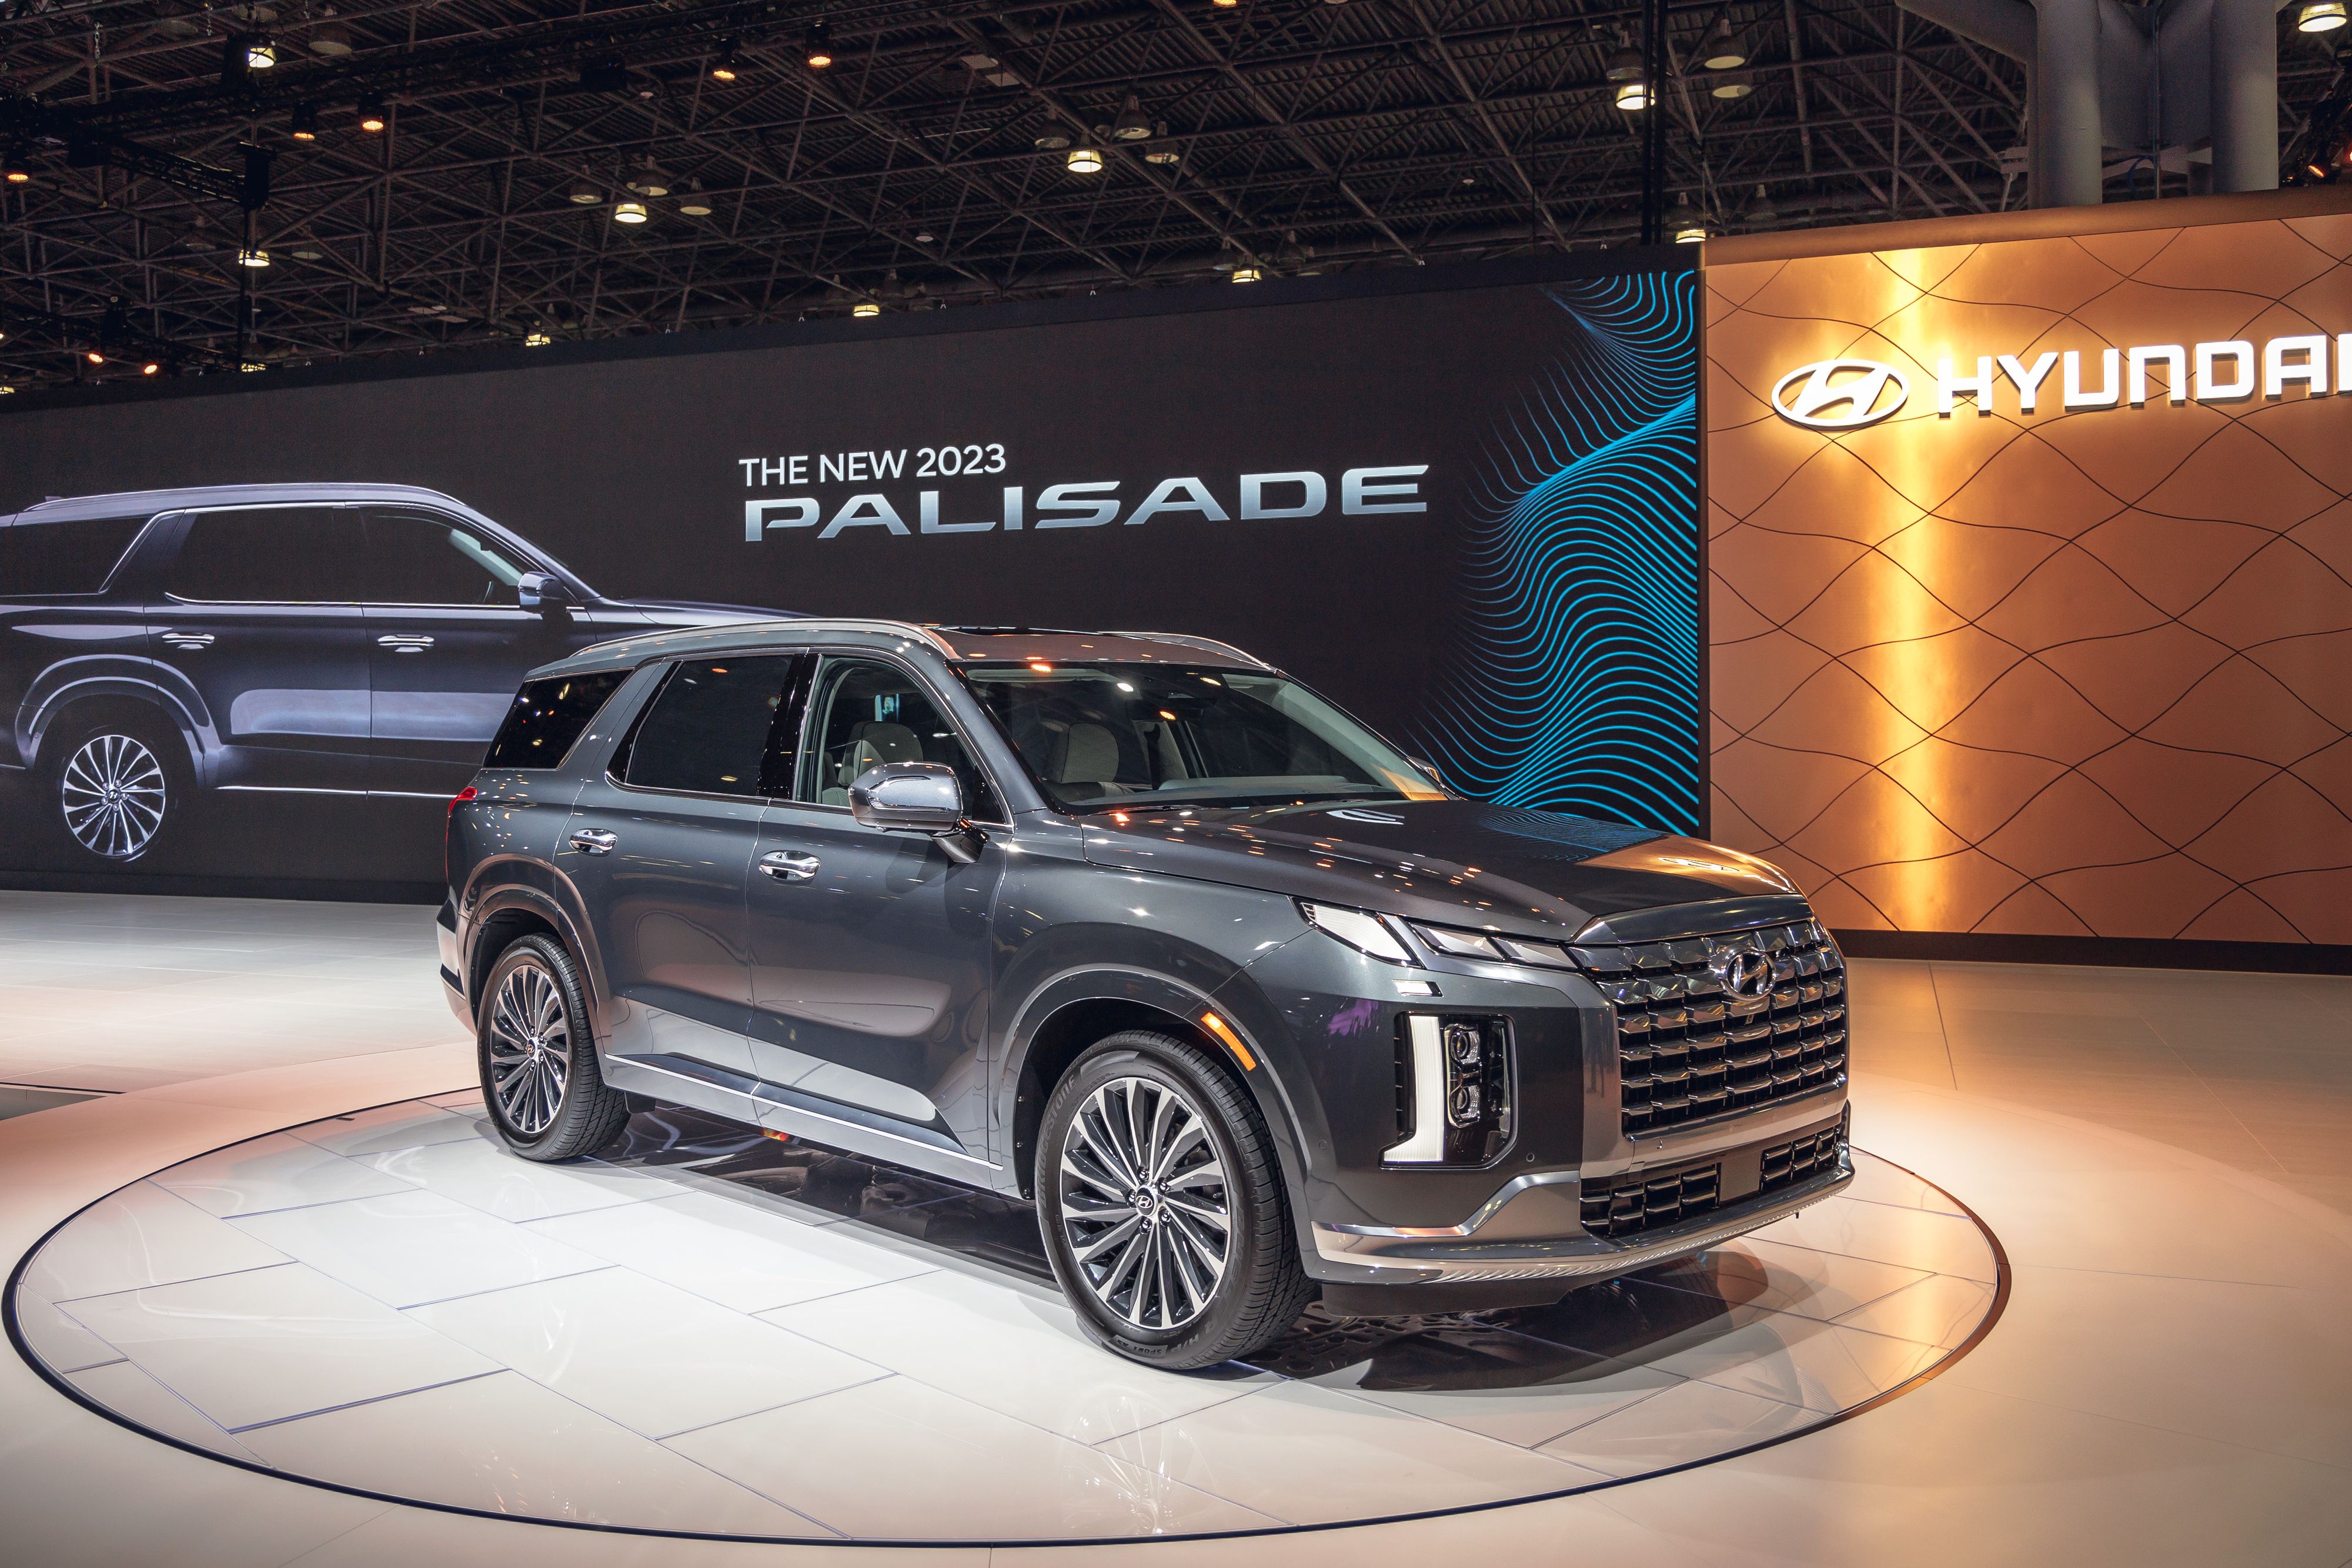 2023 Hyundai Palisade Refresh Rolls Into New York With New Looks and Tech -  CNET